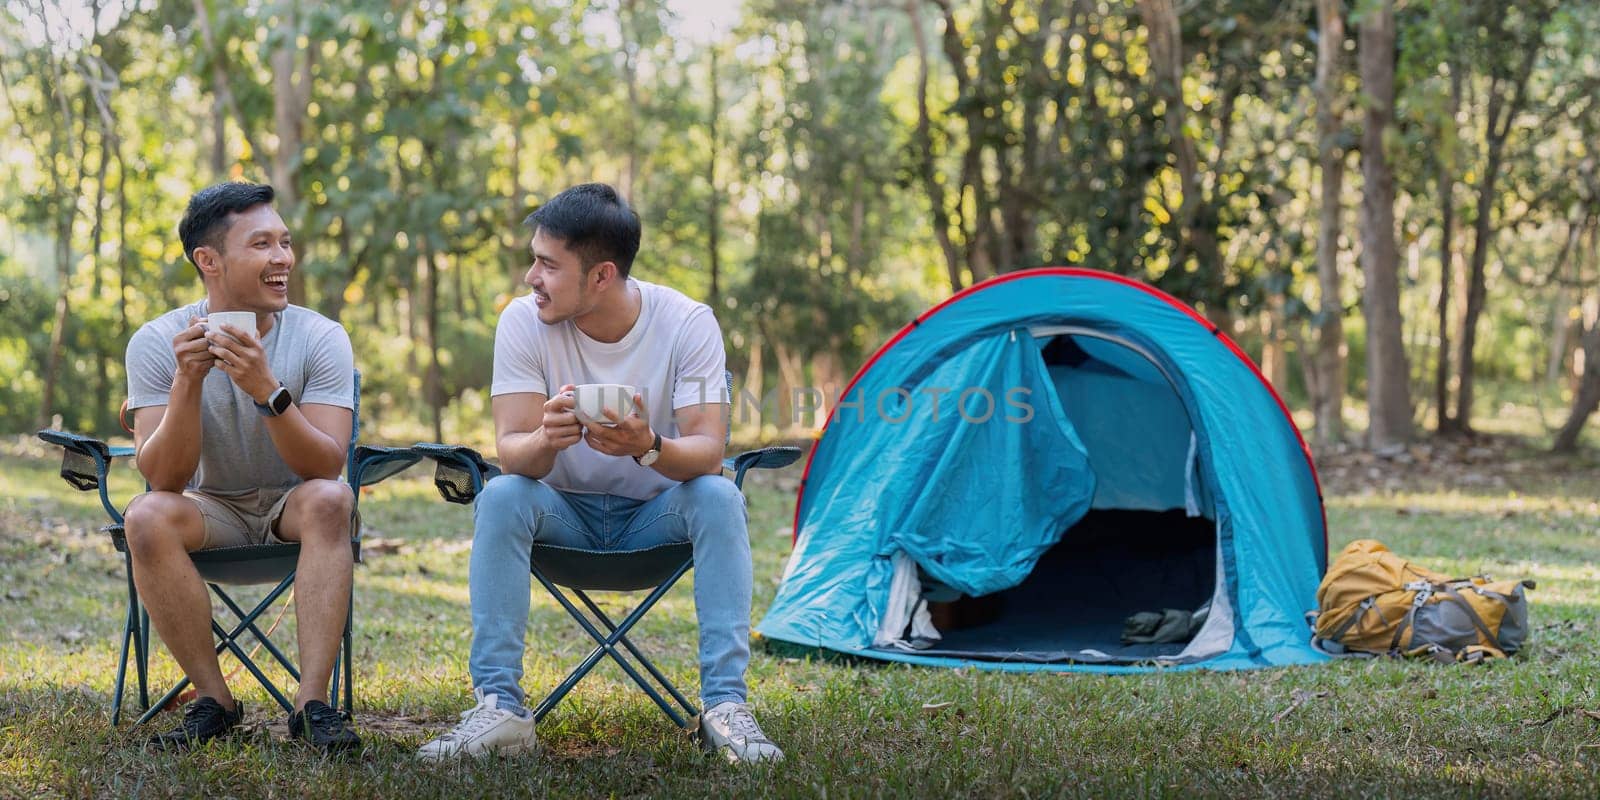 Male gay couple asian traveling with tent camping outdoor and various adventure lifestyle hiking active summer vacation.